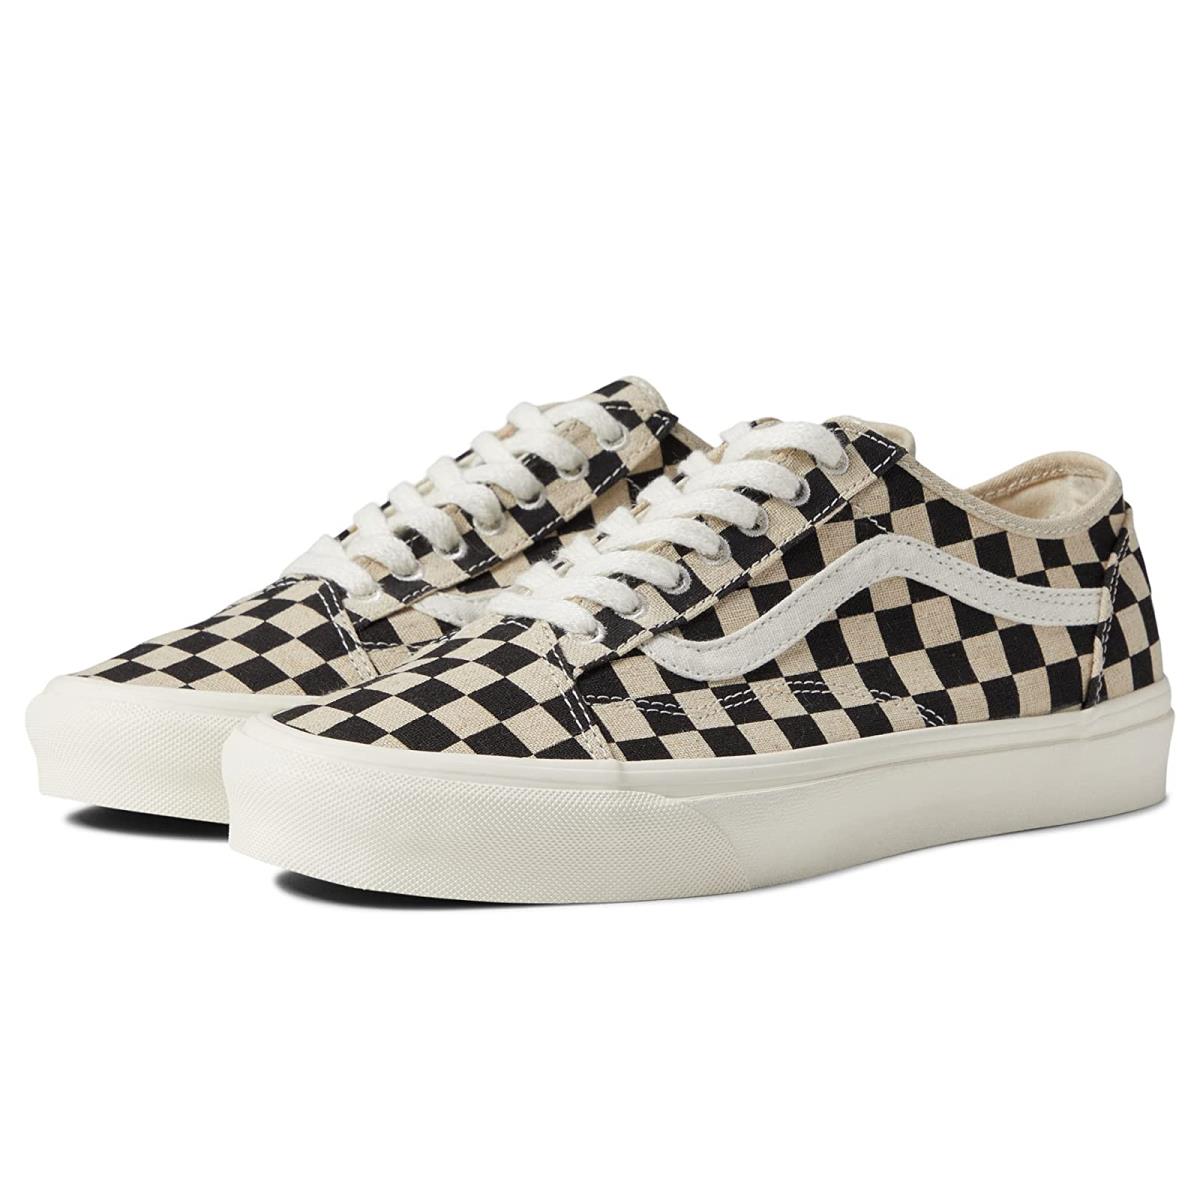 Unisex Sneakers Athletic Shoes Vans Old Skool Tapered Eco Theory Checkerboard